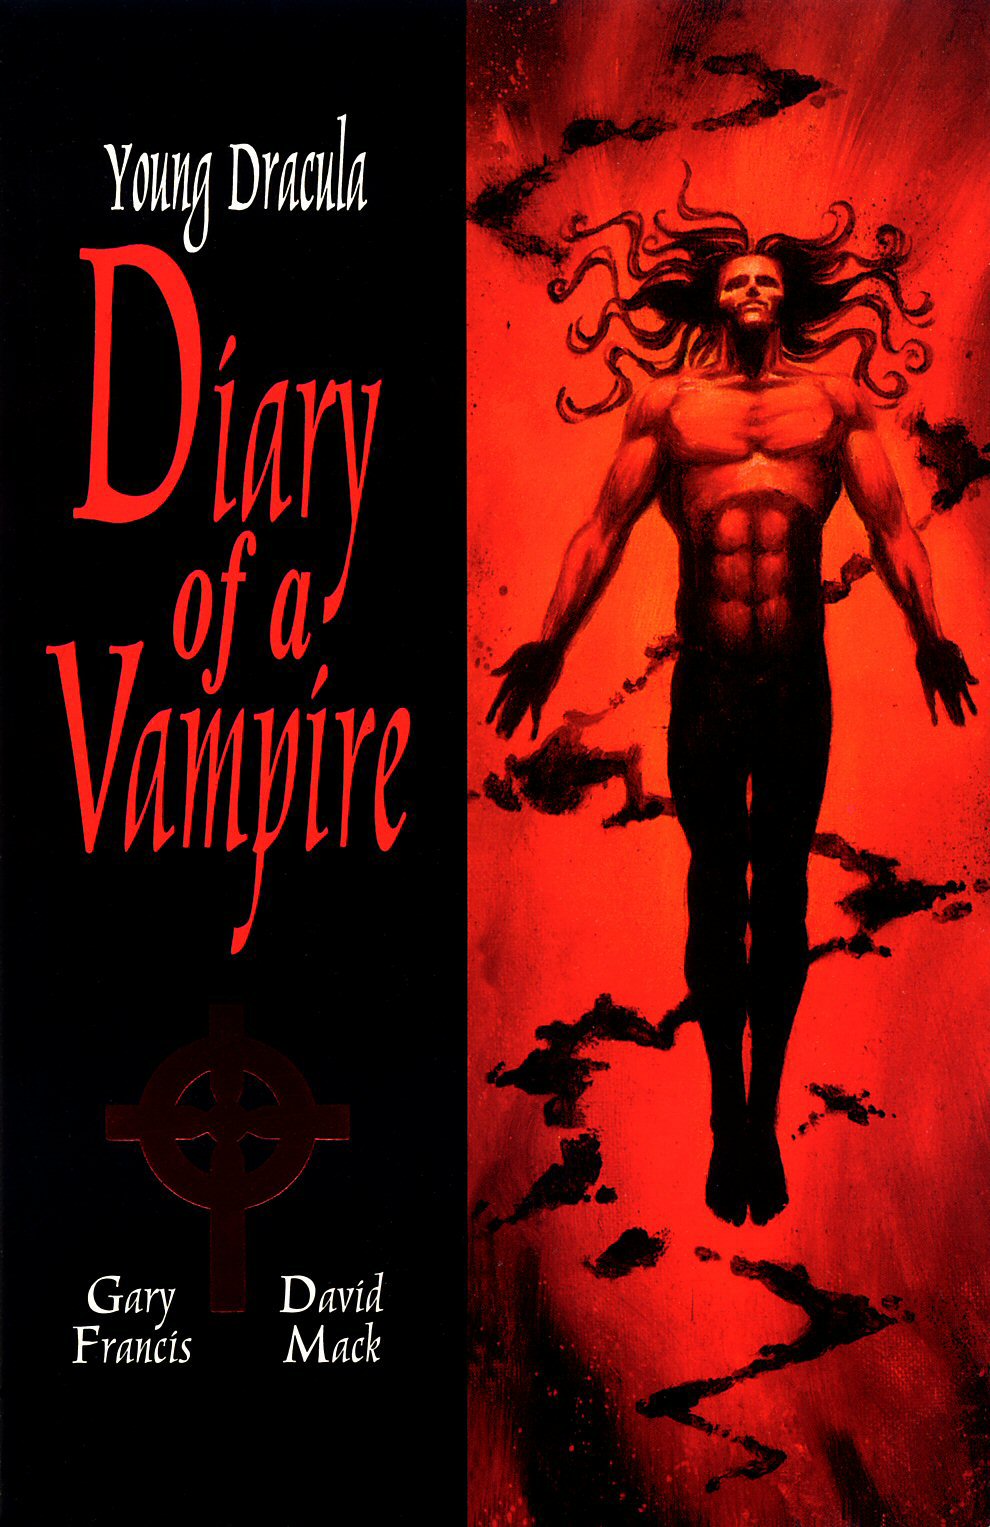 Read online Young Dracula: Diary of a Vampire comic -  Issue # TPB - 1